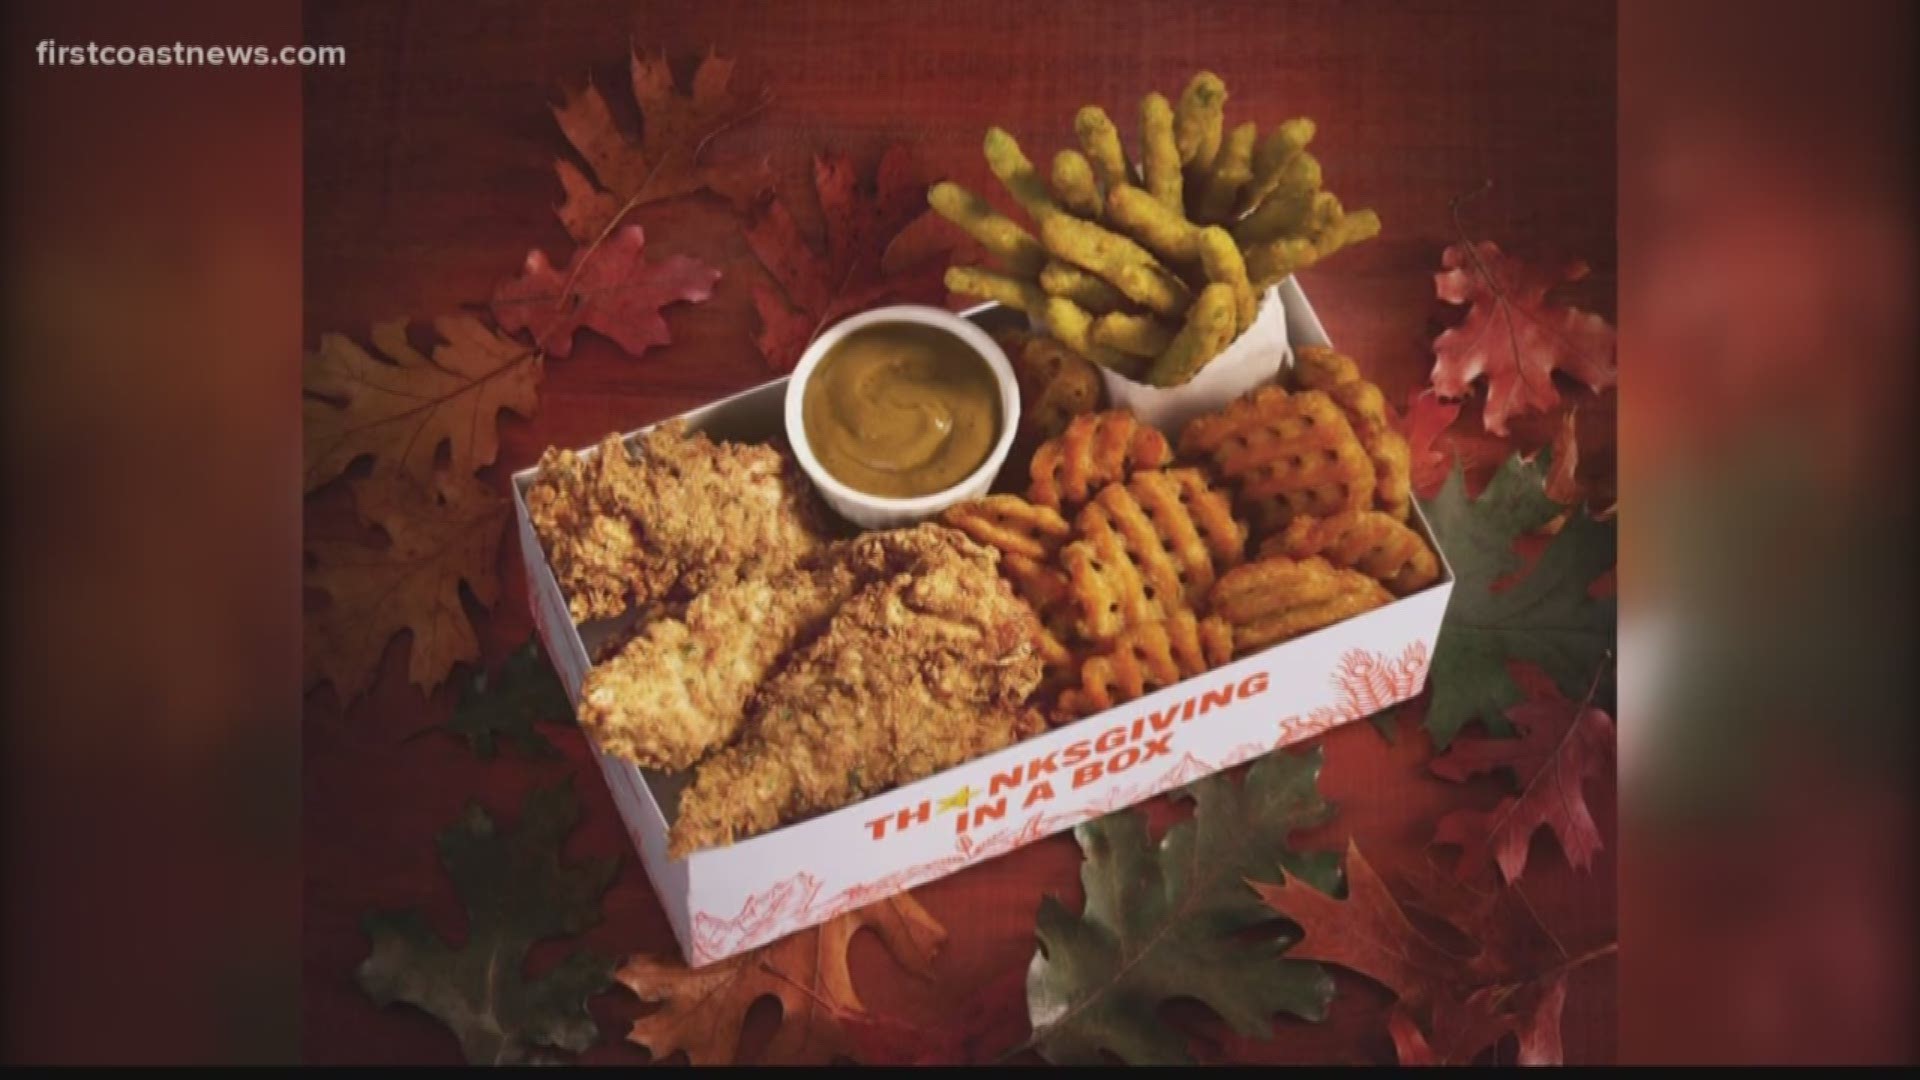 When you think Thanksgiving in a box, what comes to mind? Well, Hardee's is hoping their new seasonal meal hits the nail on the head.